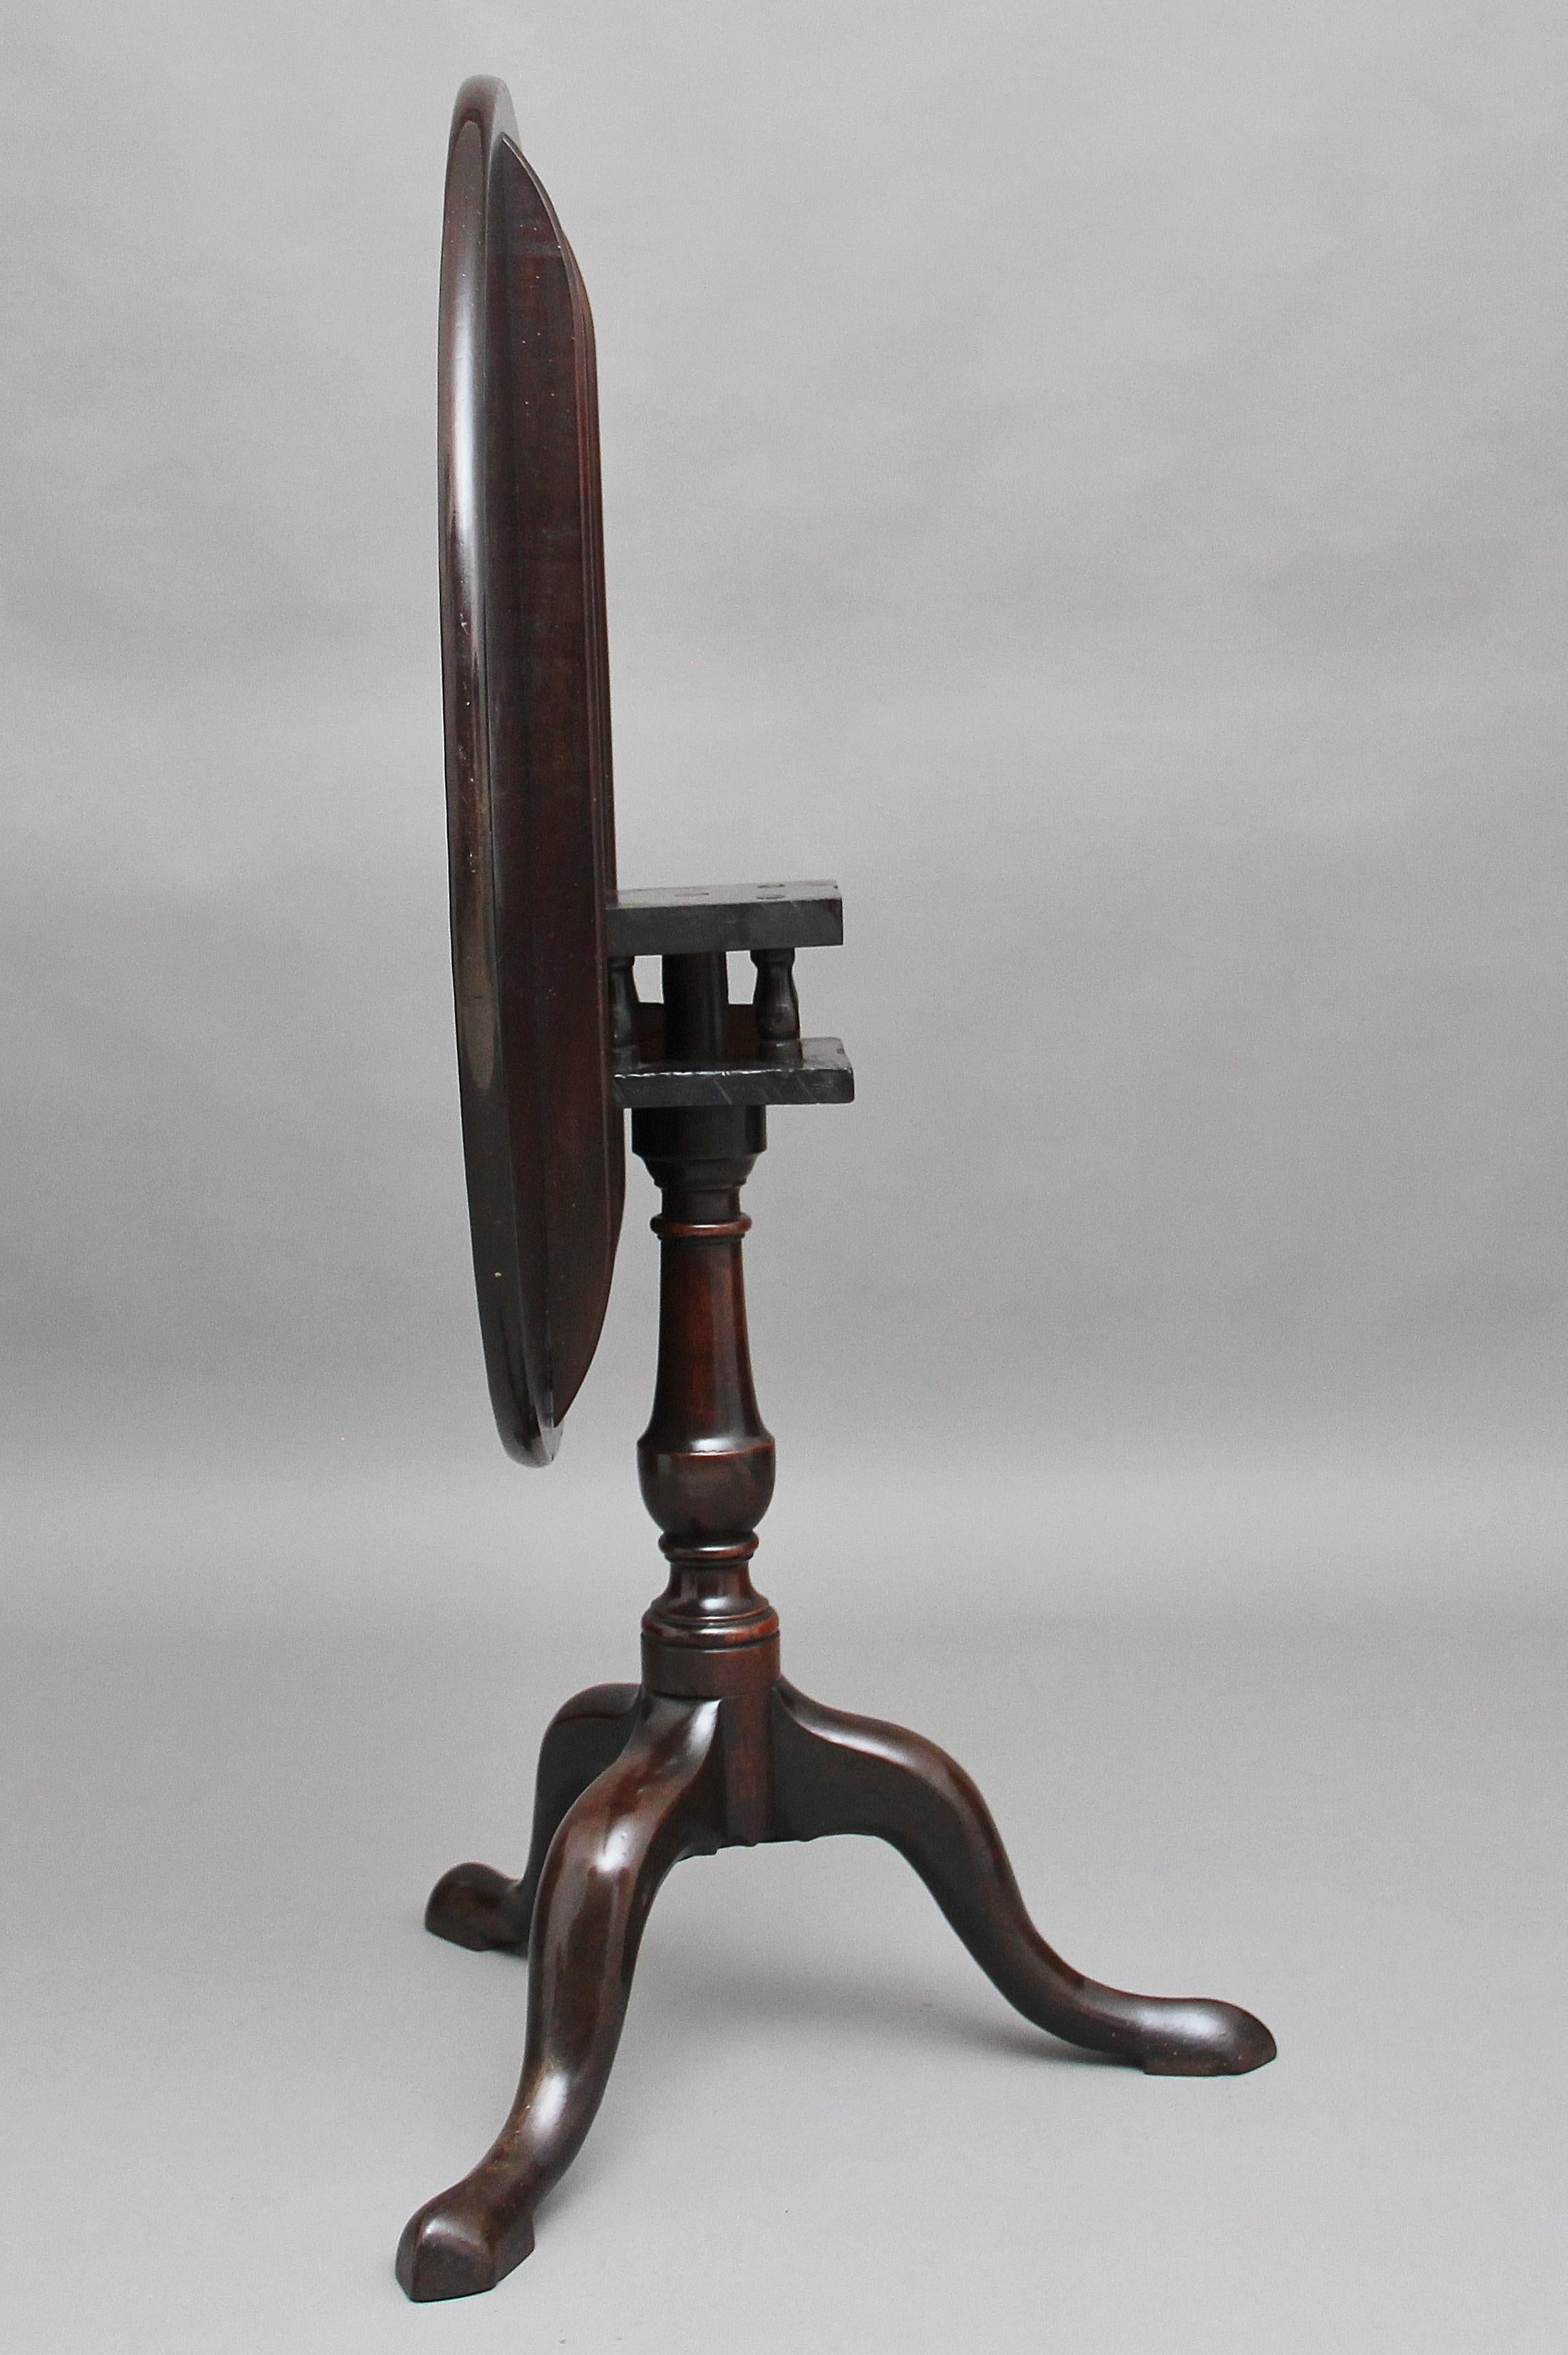 18th century mahogany tripod table, the circular mahogany top sitting on a birdcage mount so you can turn the top without turning the base, supported on a turned column terminating with three slender shaped legs, circa 1780.
     